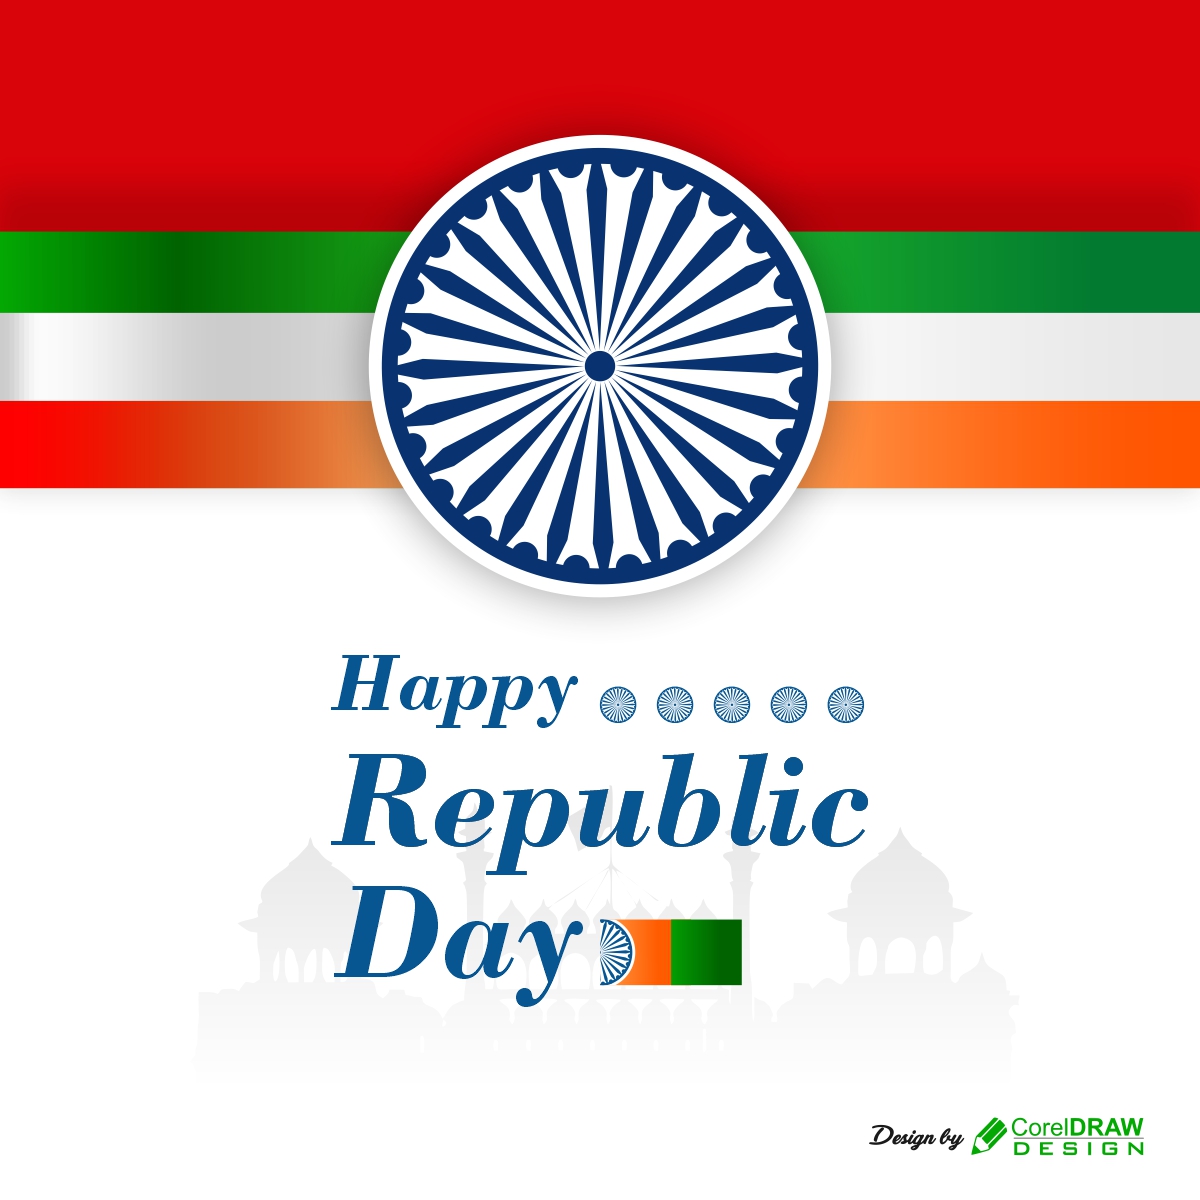 Tricolor Indian Republic Day Flag Design Free Vector